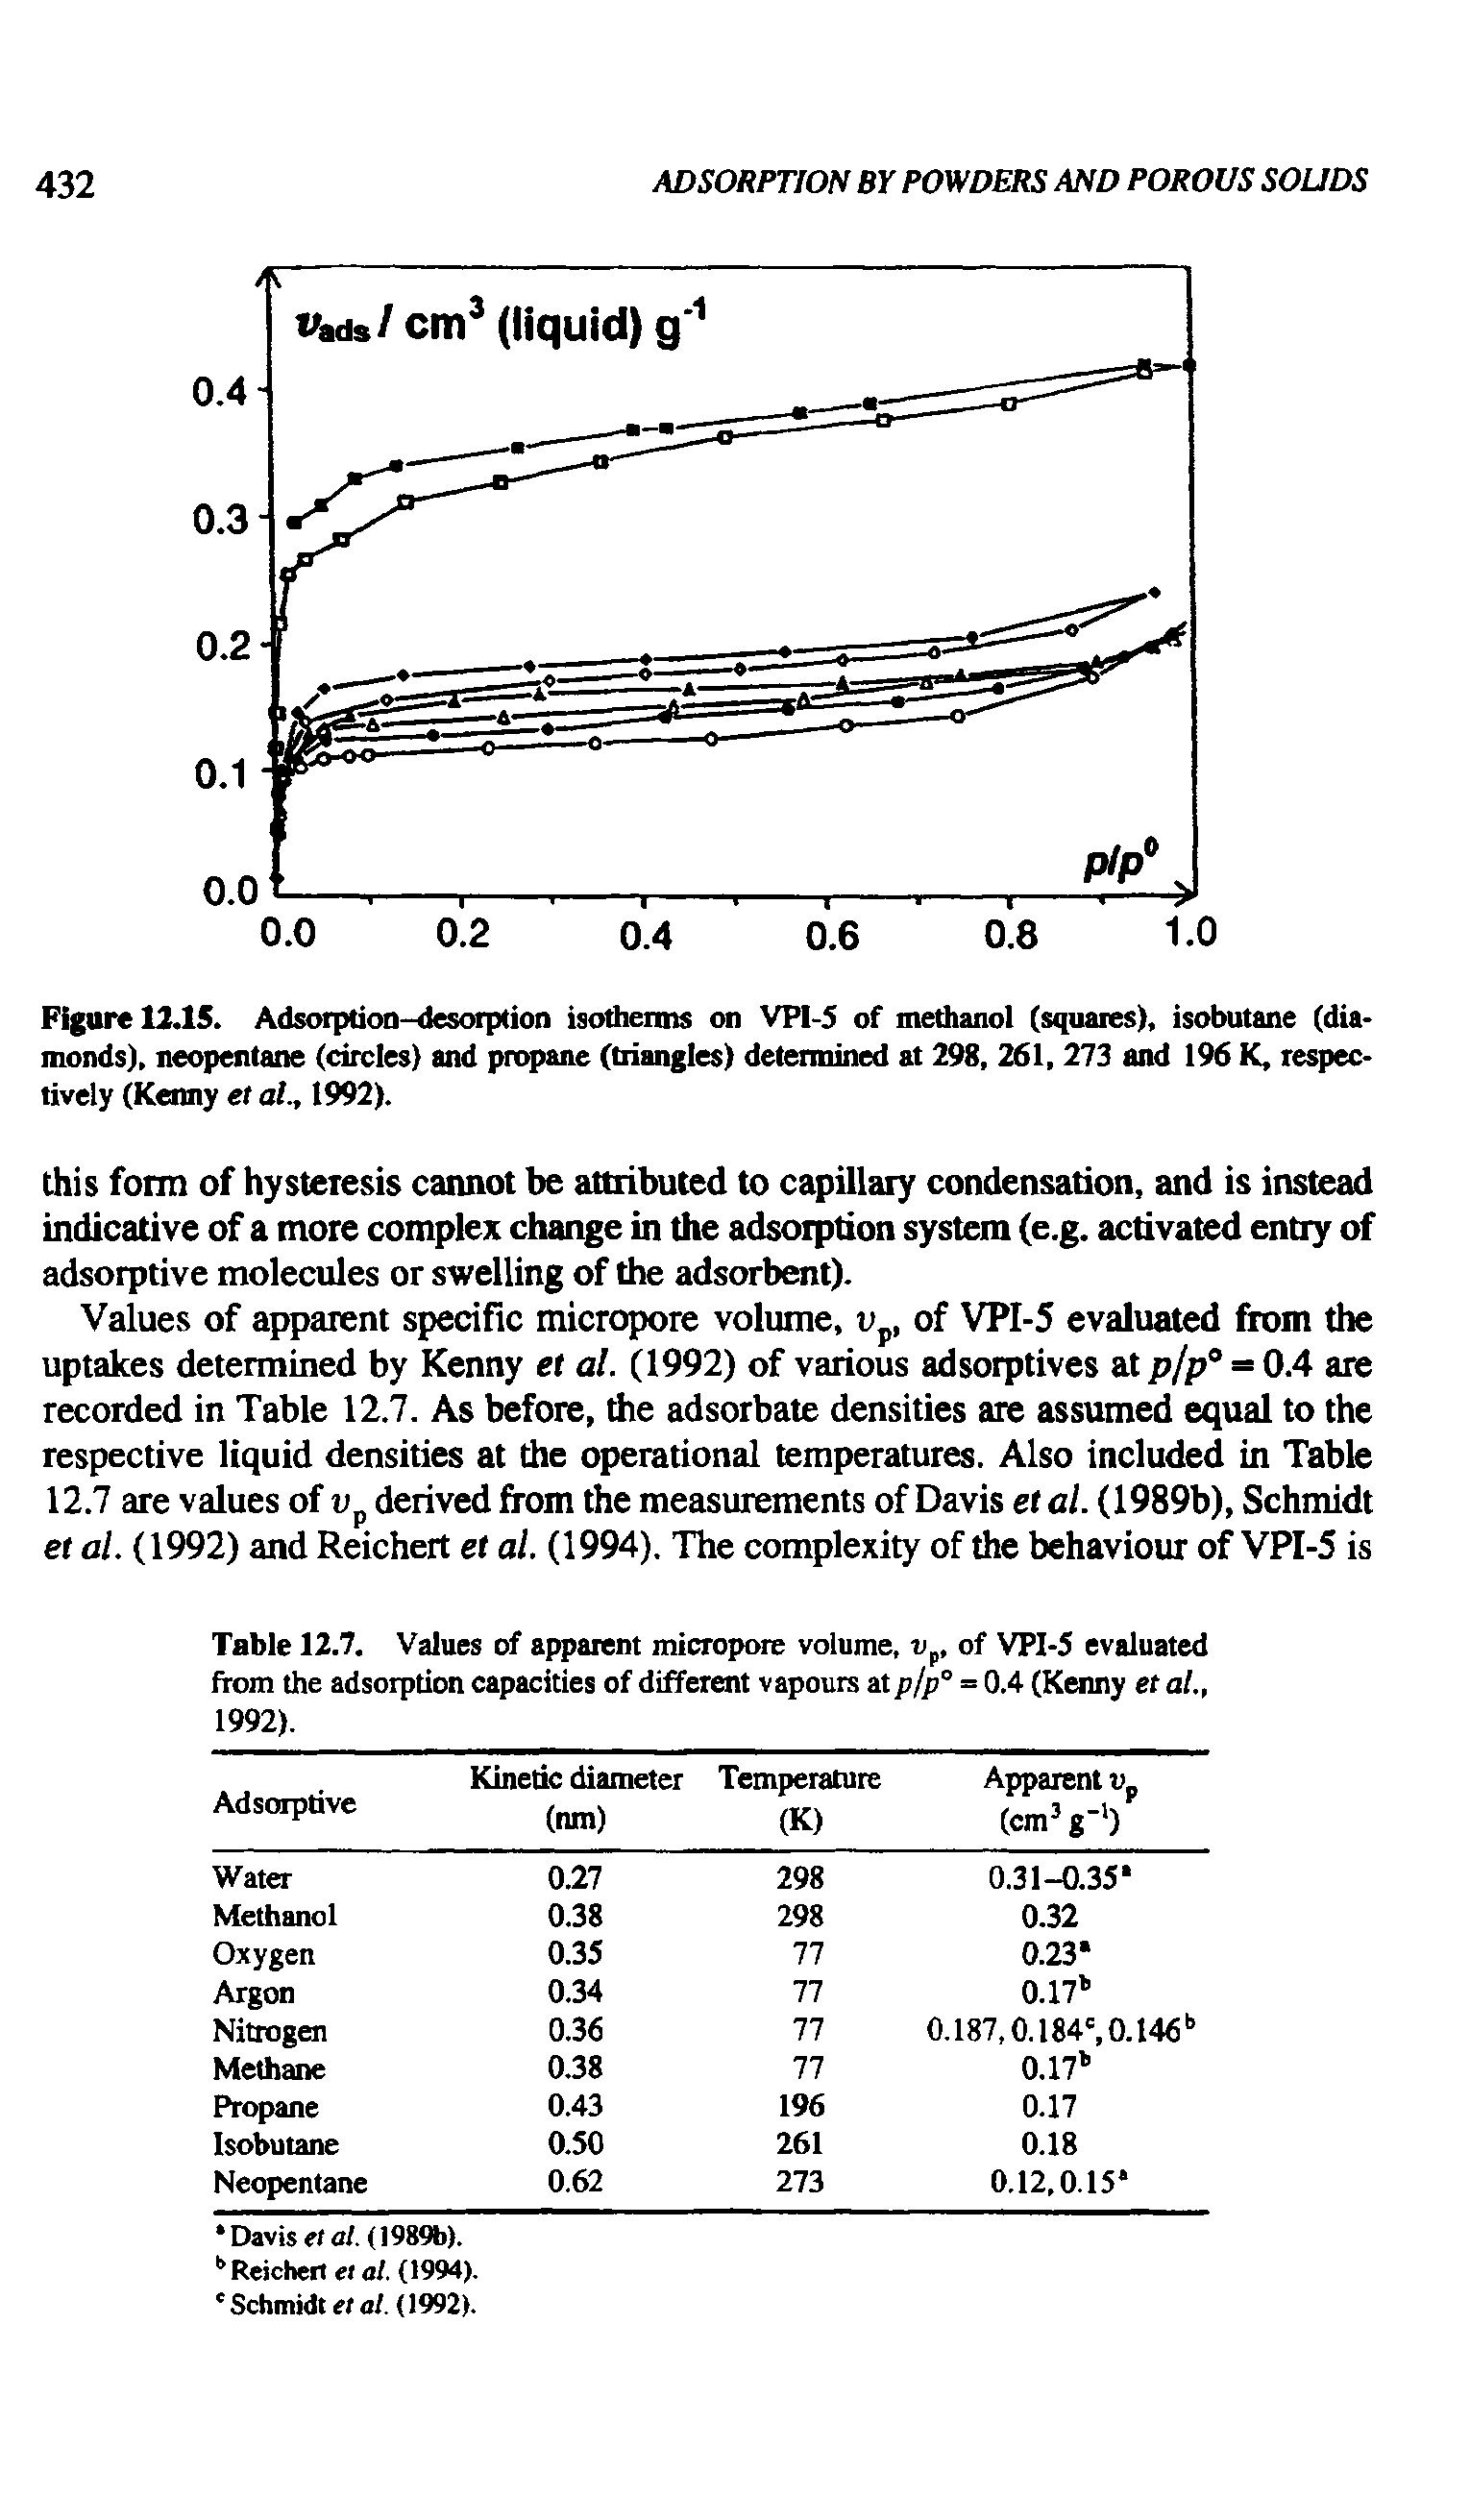 Table 12.7. Values of apparent micropore volume, vp, of VPI-5 evaluated from the adsorption capacities of different vapours at p/p° = 0.4 (Kenny et al., 1992).